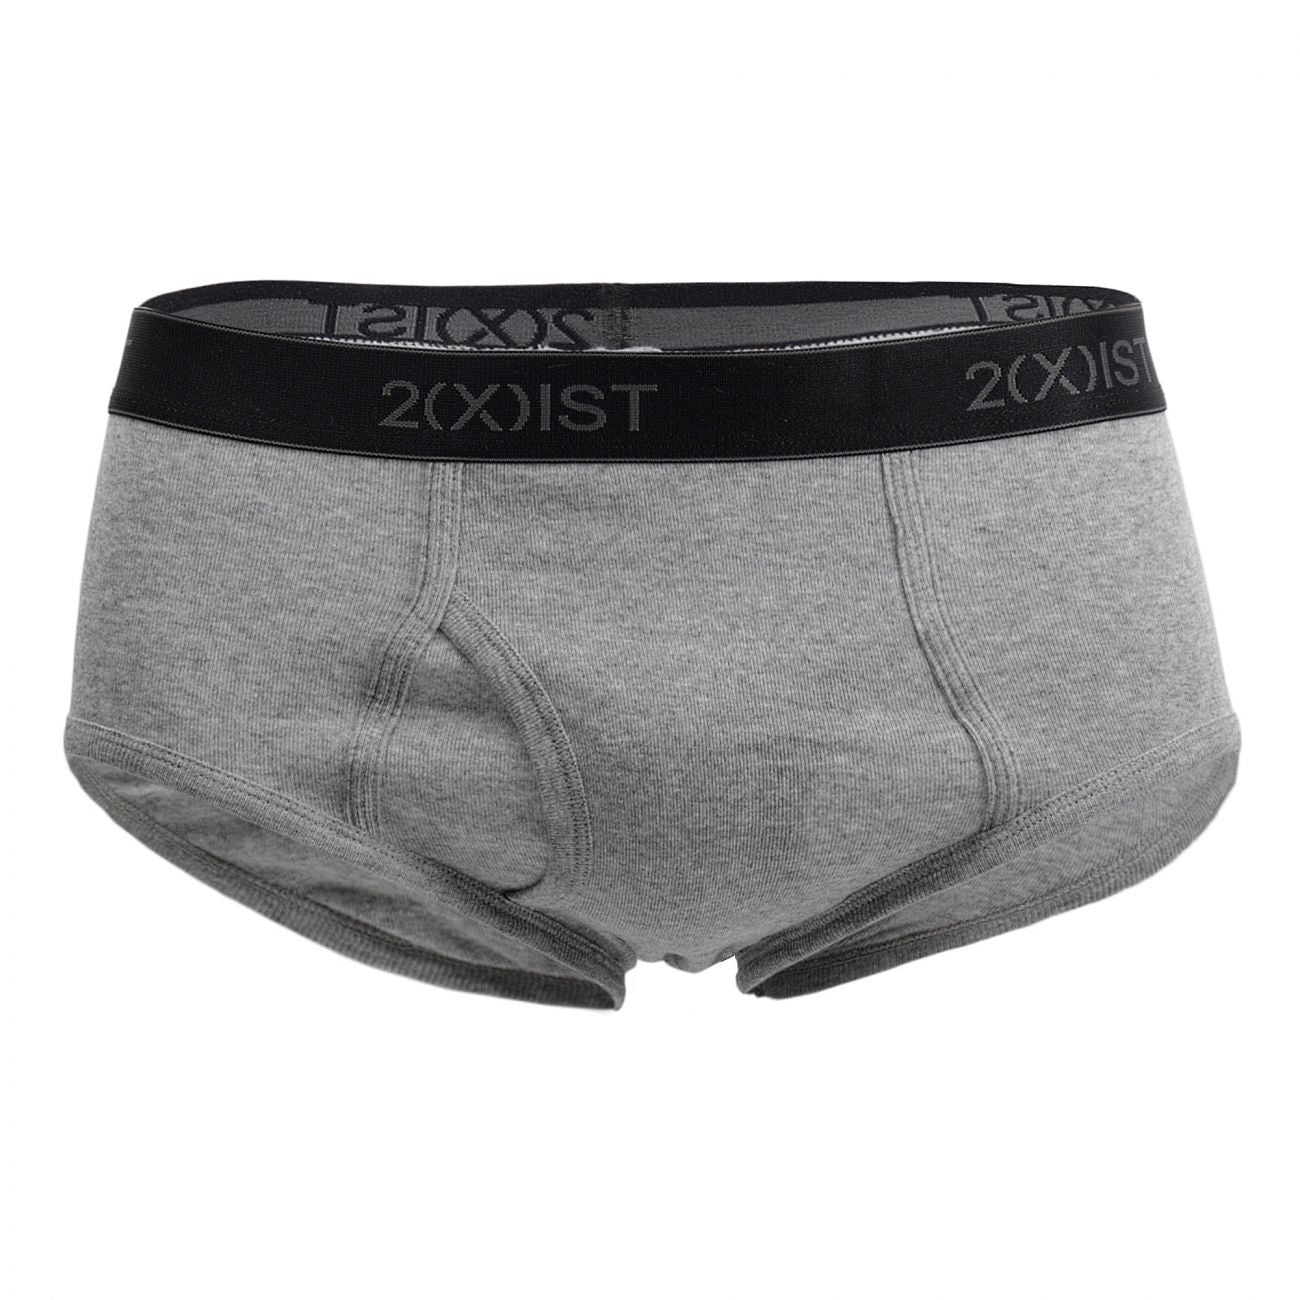 2(X)IST 3102003903 Cotton 3PK Fly-Front Briefs Black Gray Charcoal